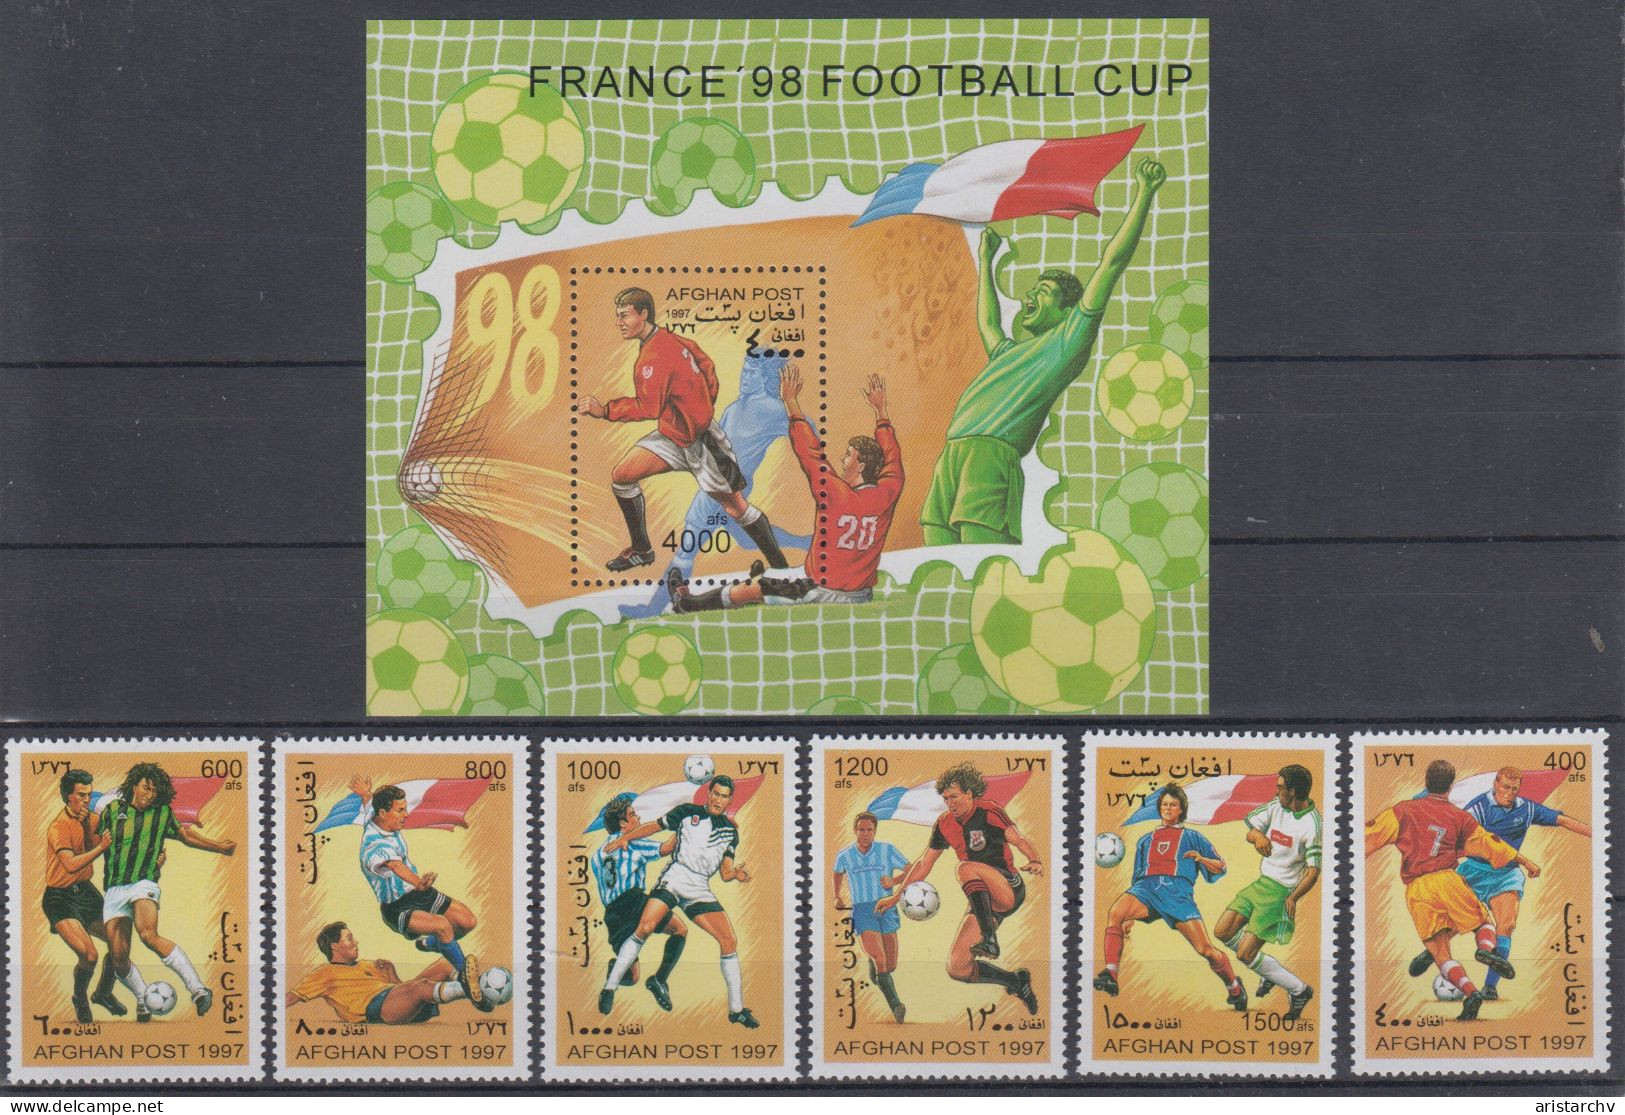 AFGHANISTAN 1998 FOOTBALL WORLD CUP S/SHEET AND 6 STAMPS - 1998 – Francia